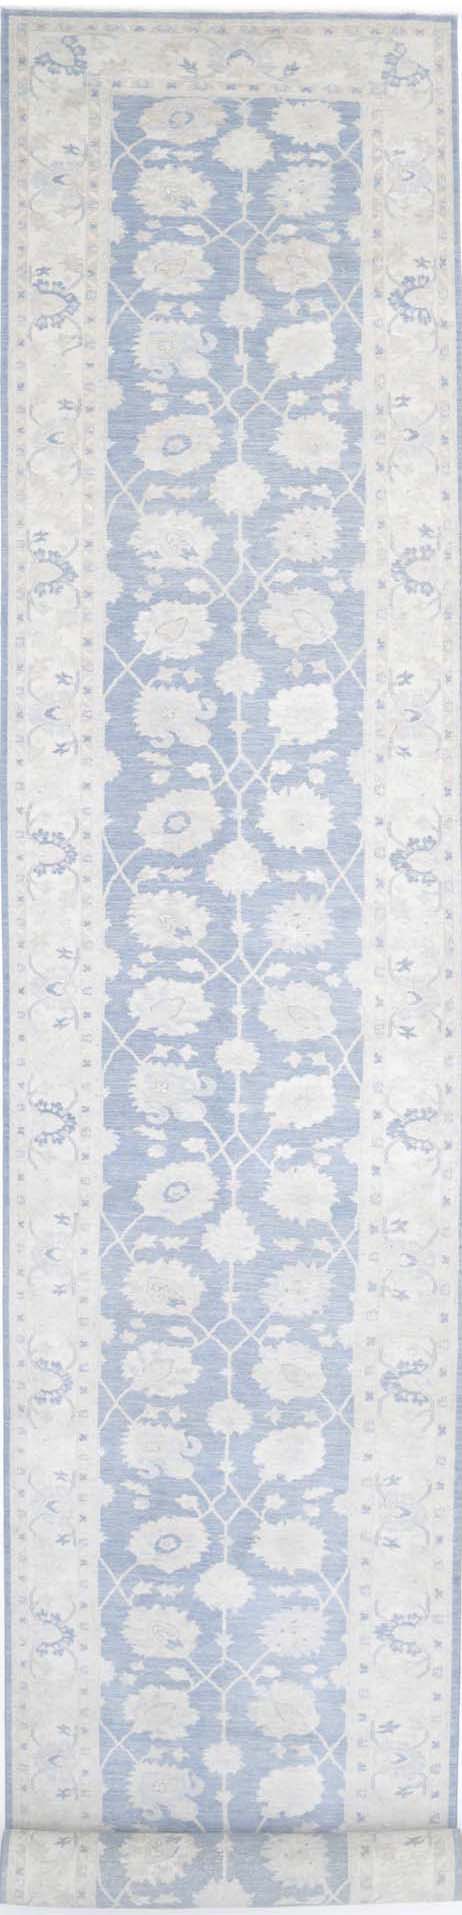 Hand Knotted Serenity Wool Rug - 4'1'' x 35'11''